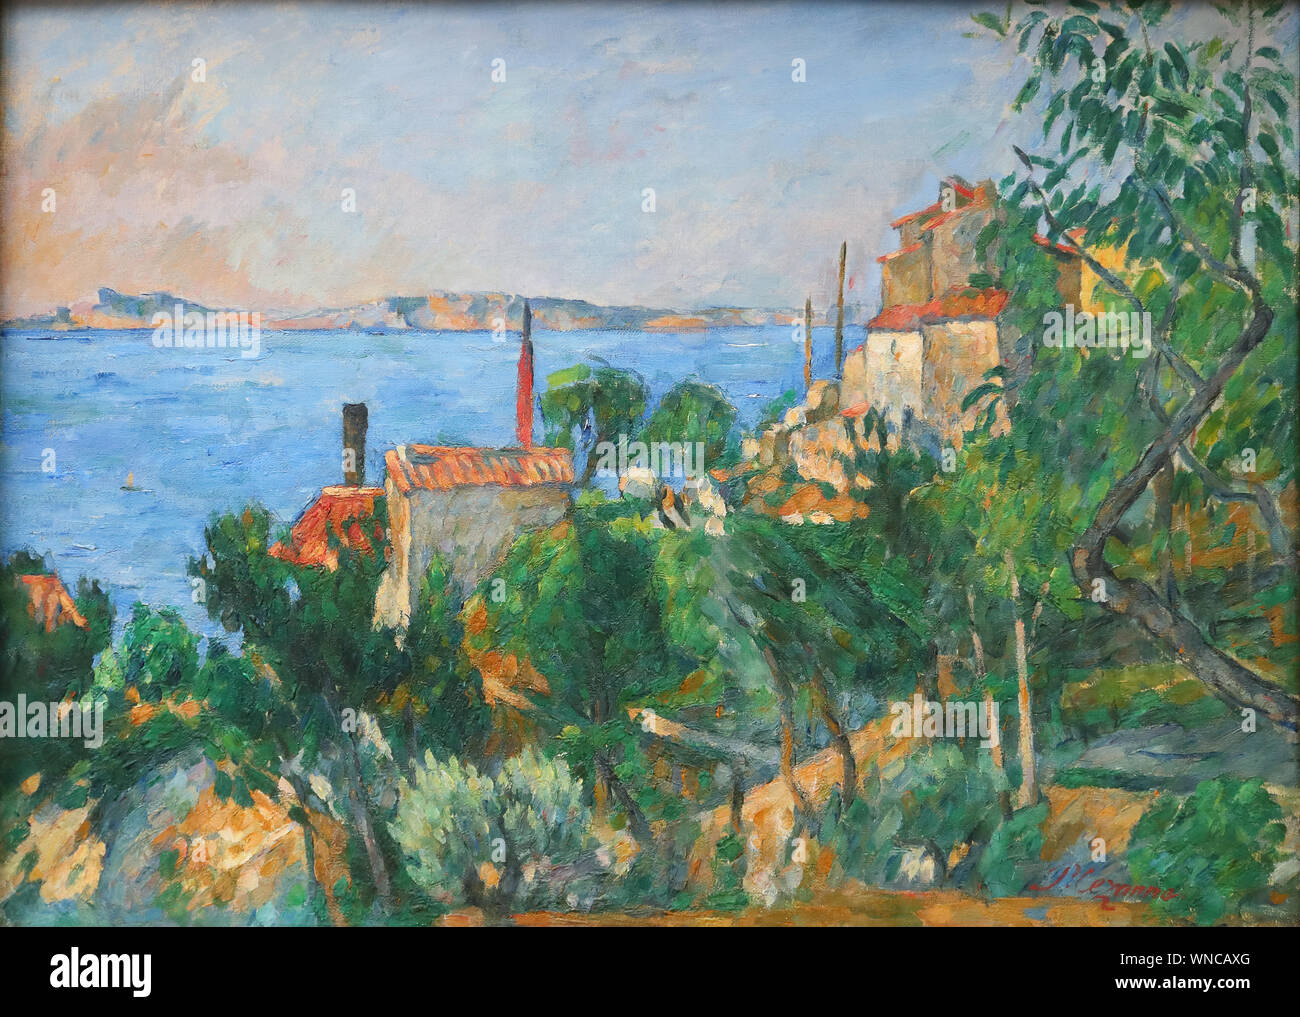 The Sea at L'Estaque by French Impressionist painter Paul Cezanne at the National Gallery, Trafalgar Square, London, UK Stock Photo